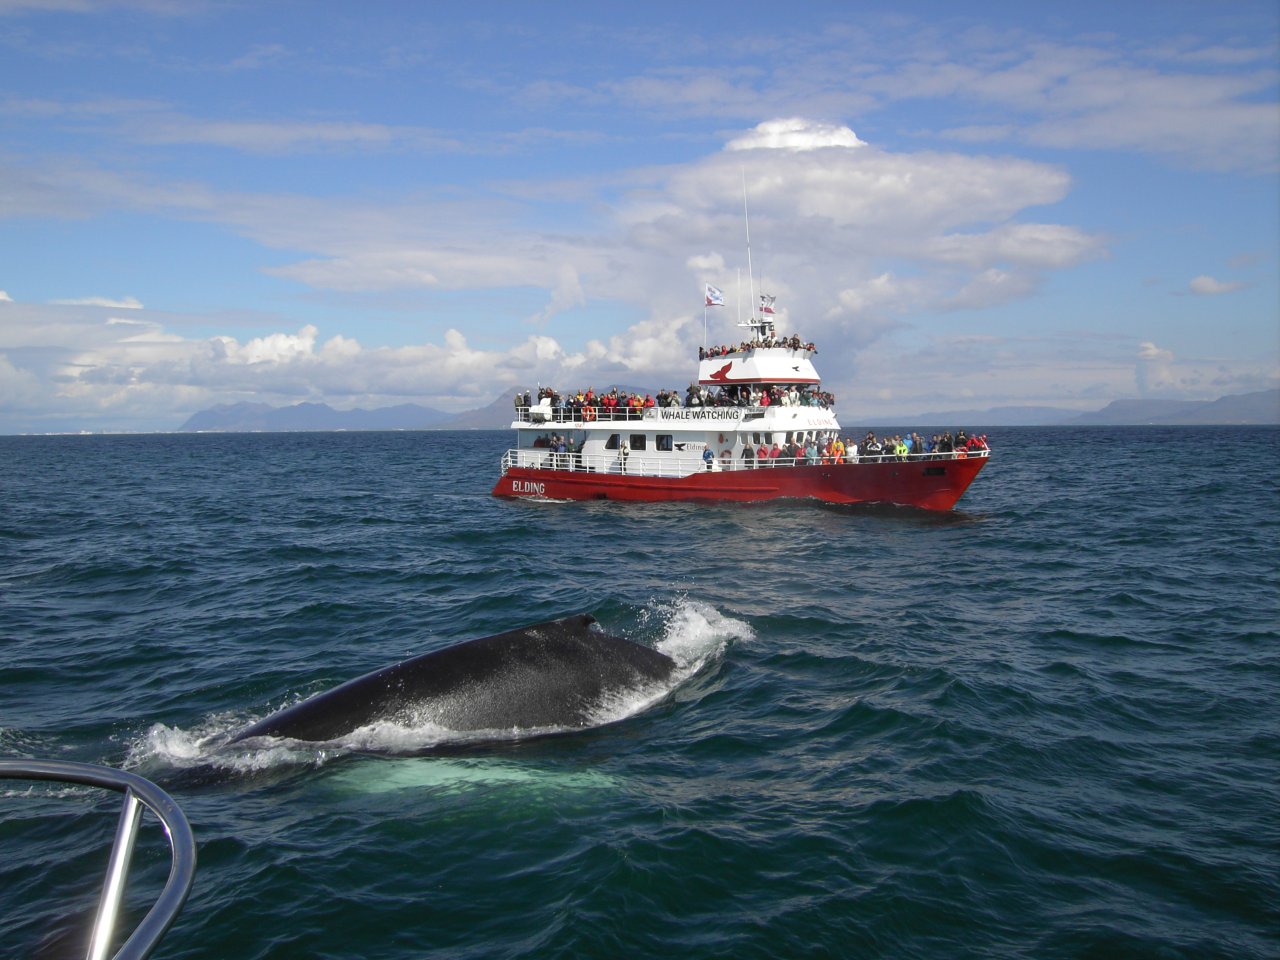 Whale watching in winter in Norway